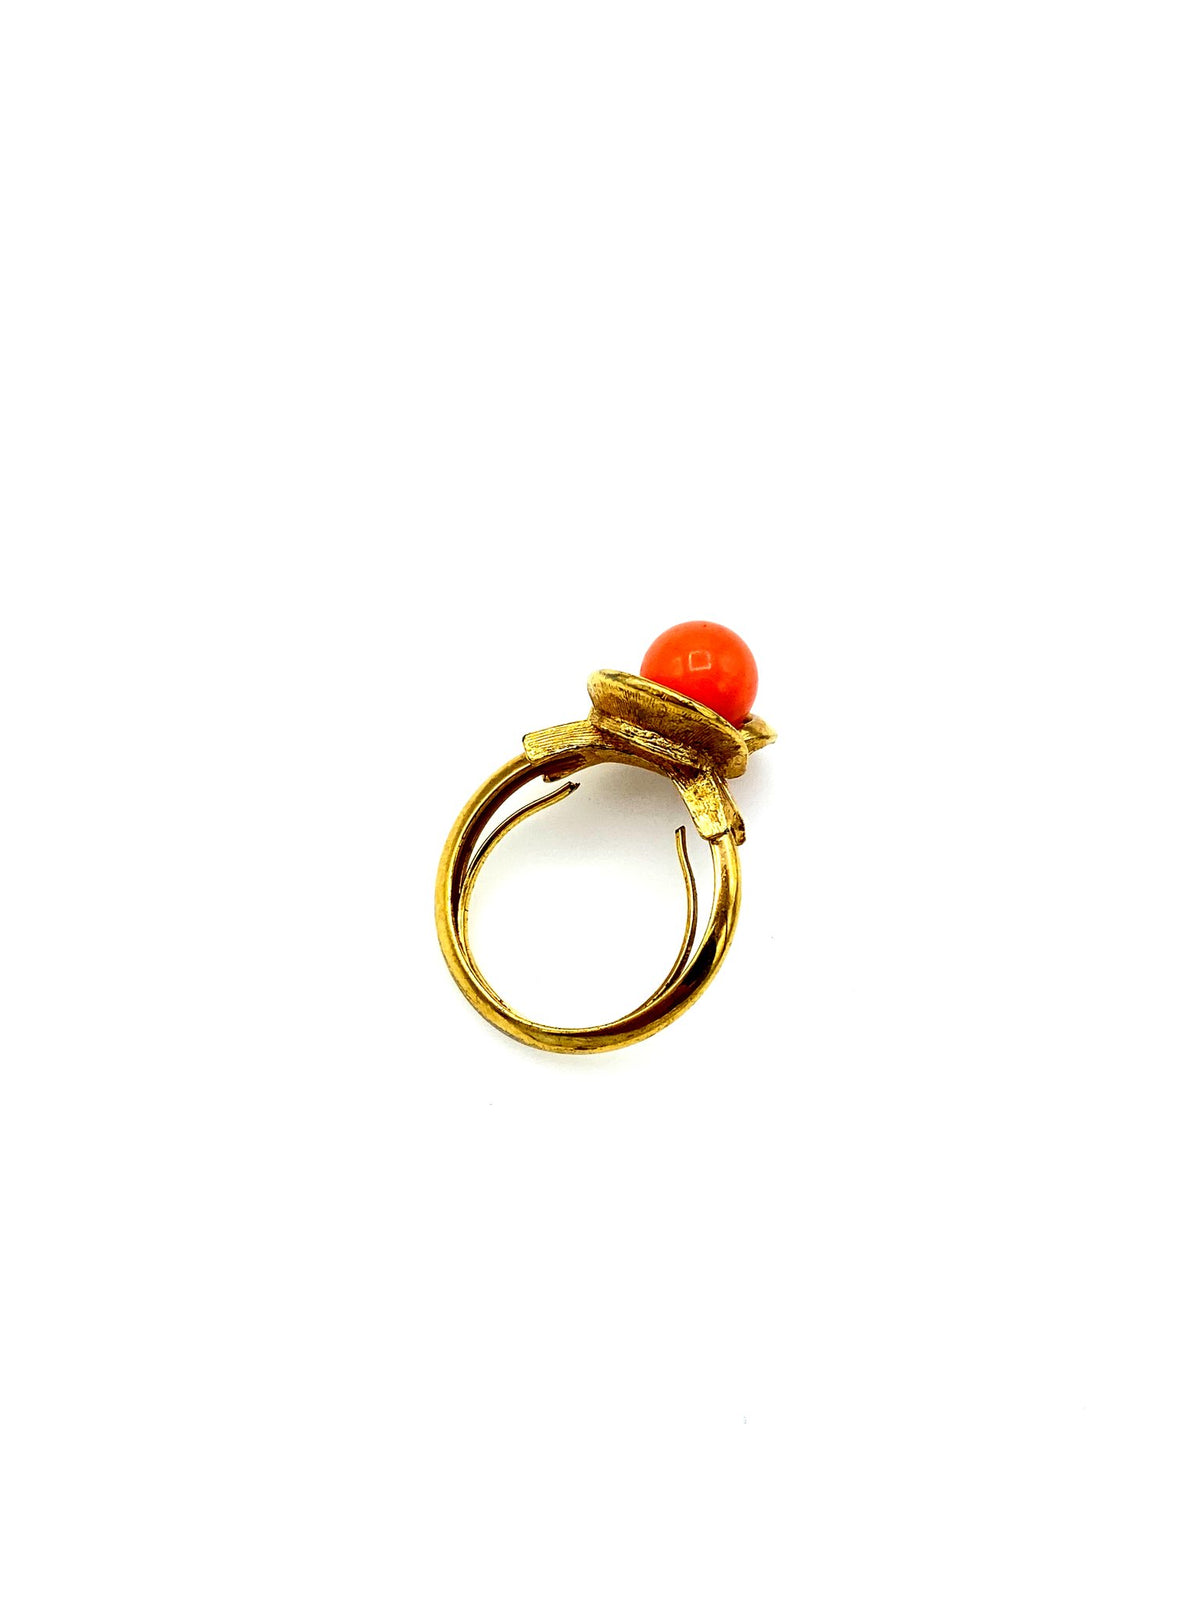 Avon Coral Floral Vintage Adjustable Cocktail Ring - 24 Wishes Vintage Jewelry